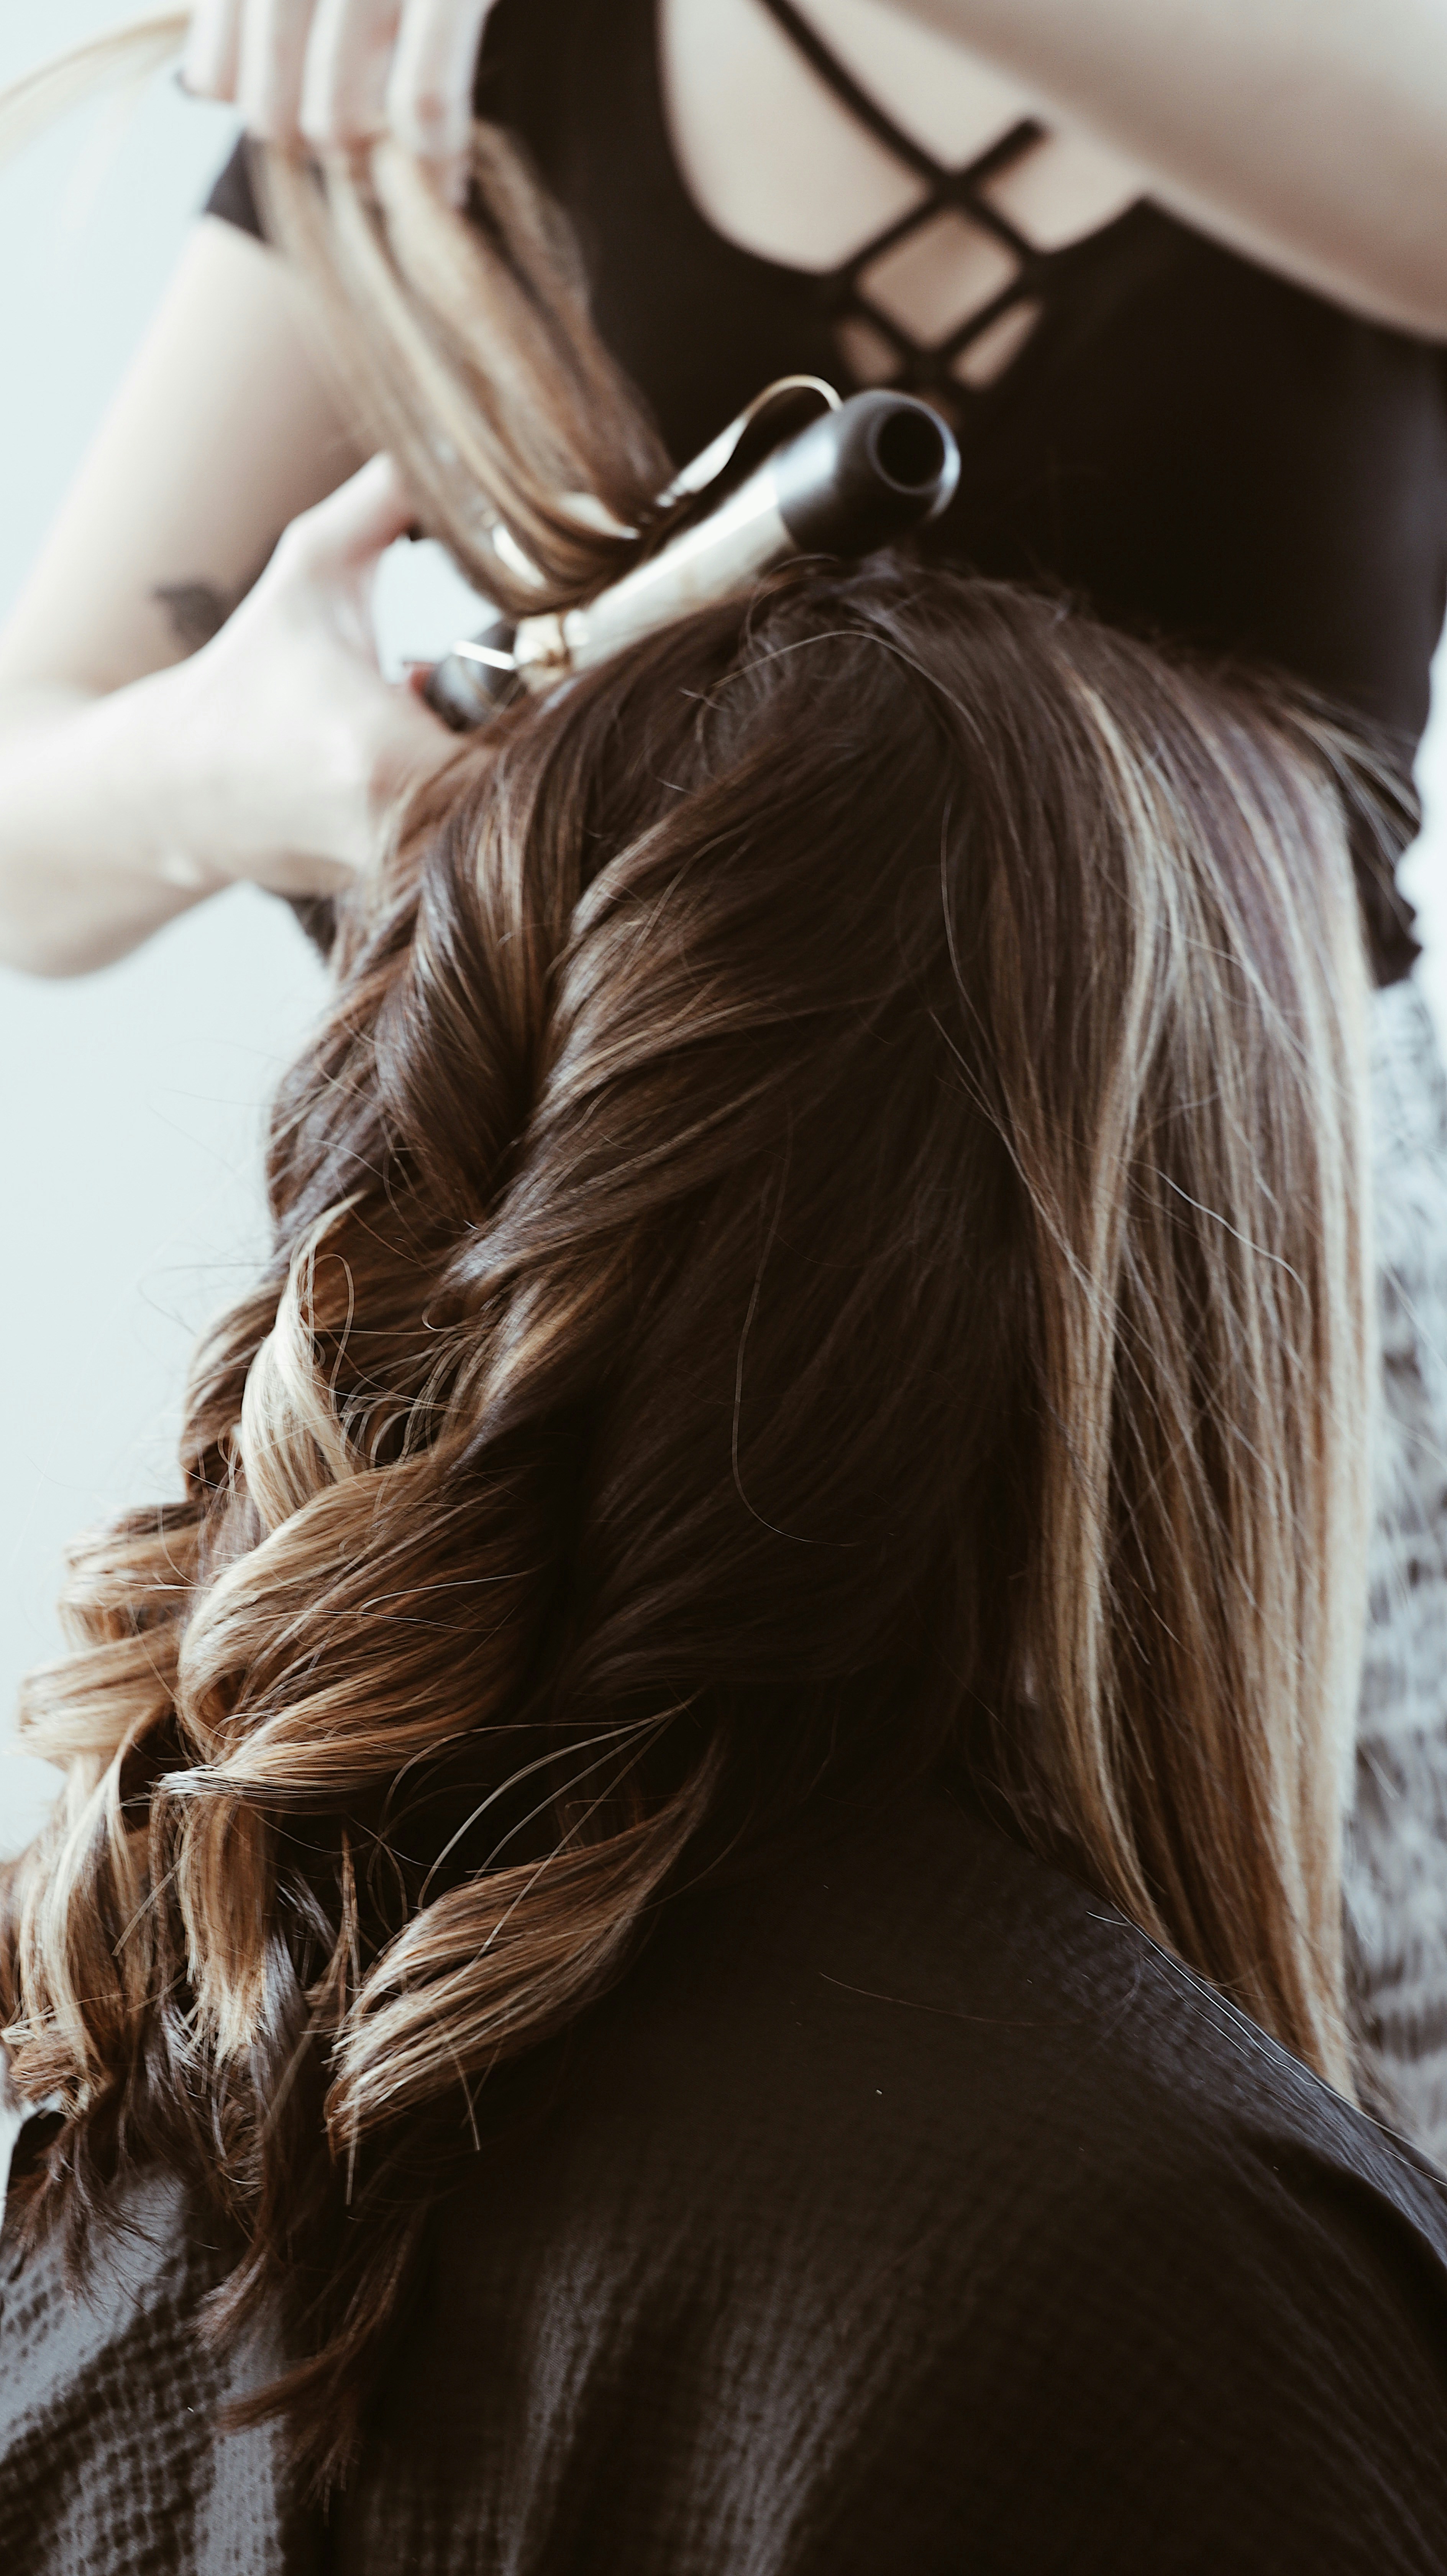 How Can I Avoid Crimp Marks When Using A Curling Iron?